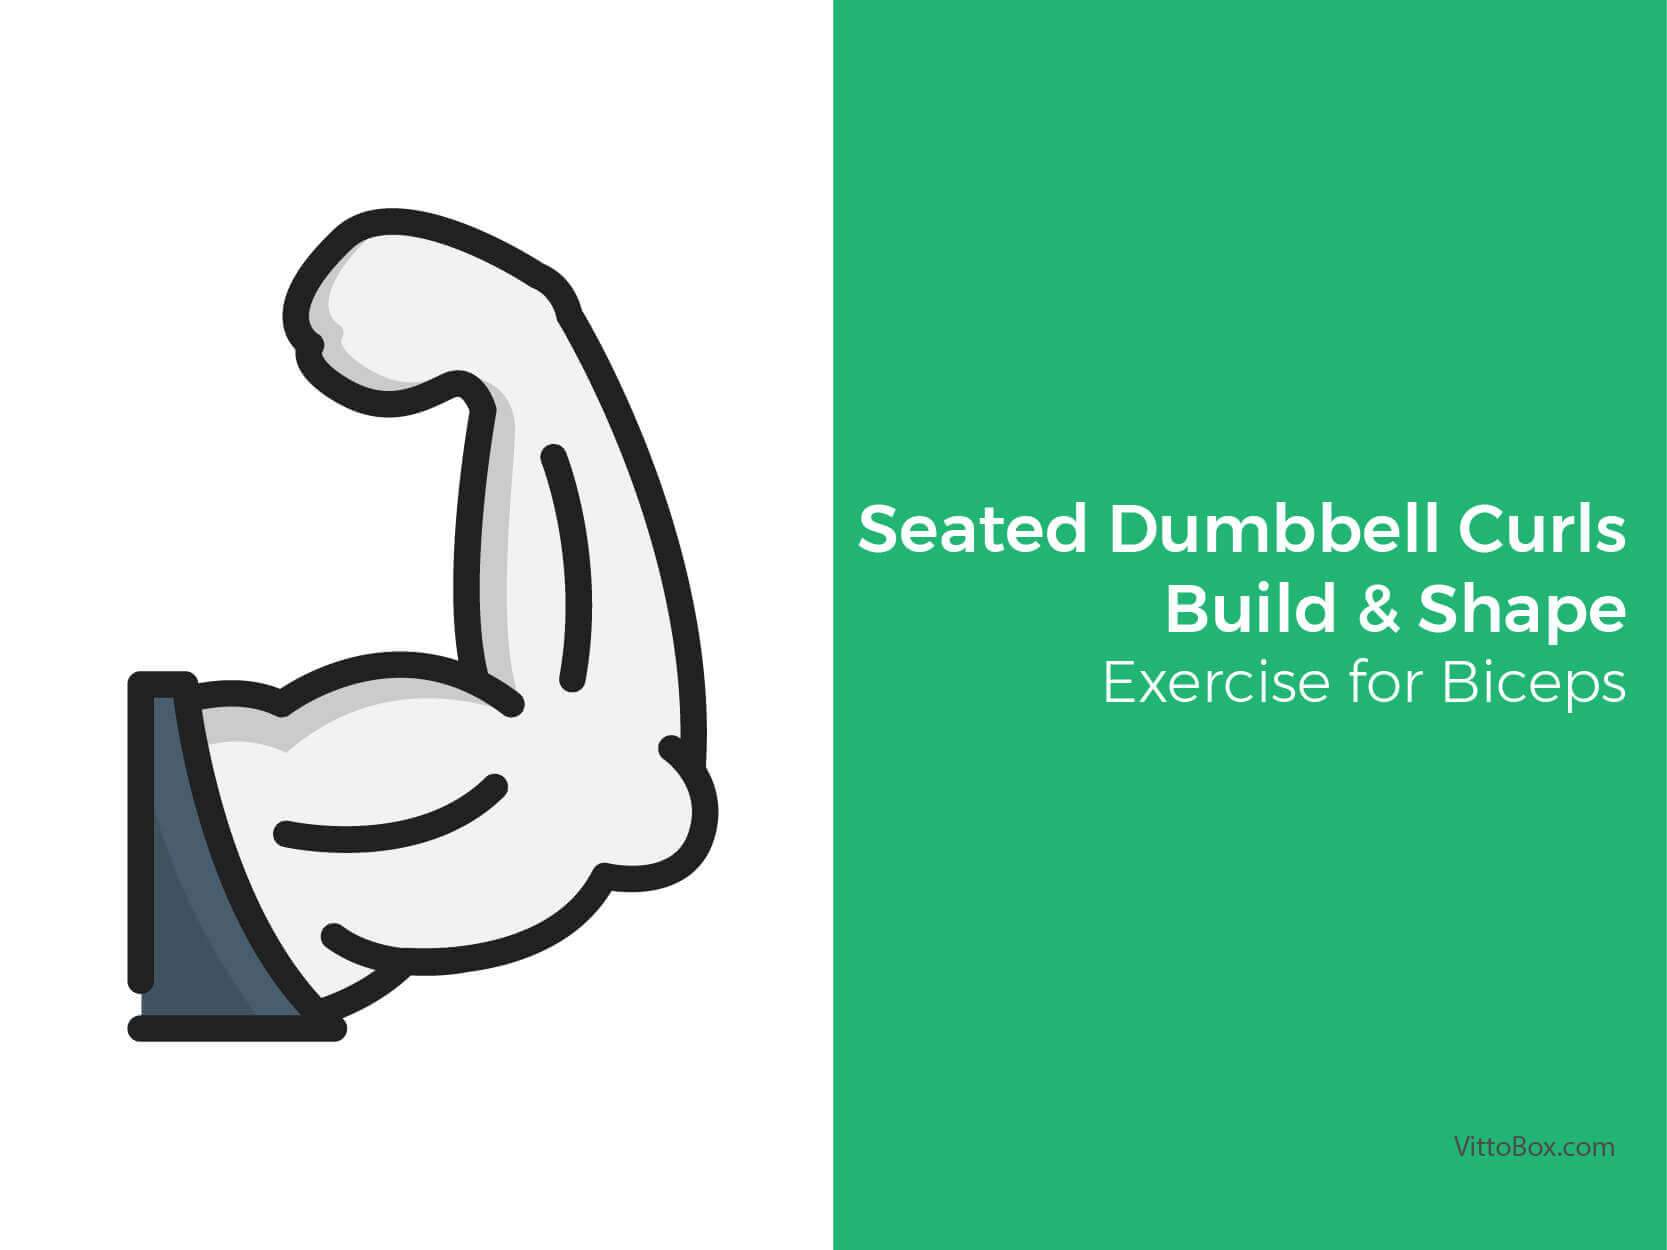 Seated Dumbbell Curls To Build And Shape Biceps